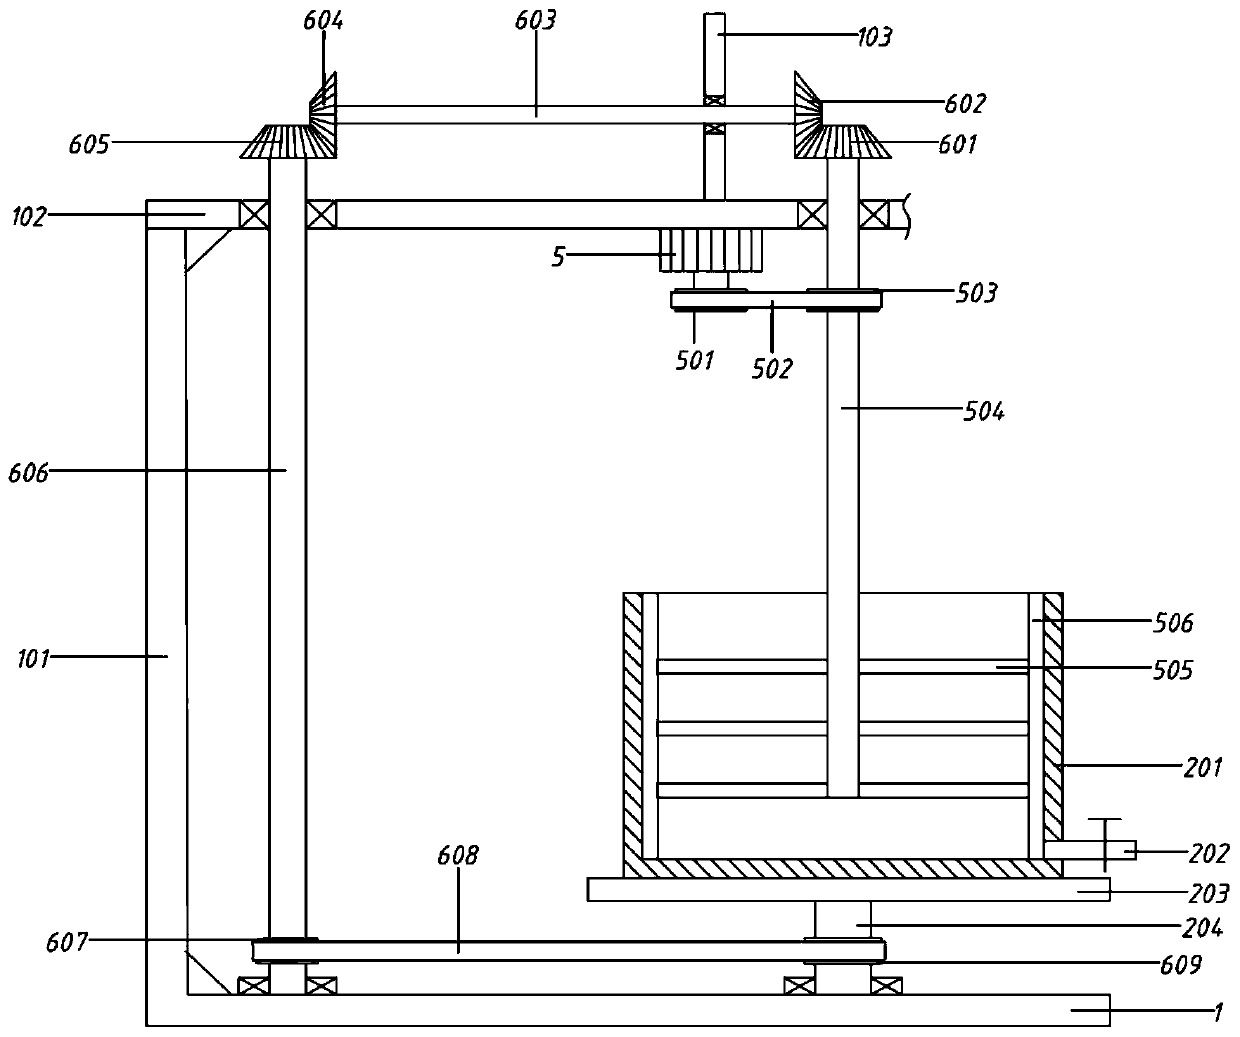 Preparation equipment capable of achieving uniform mixing for cosmetic production